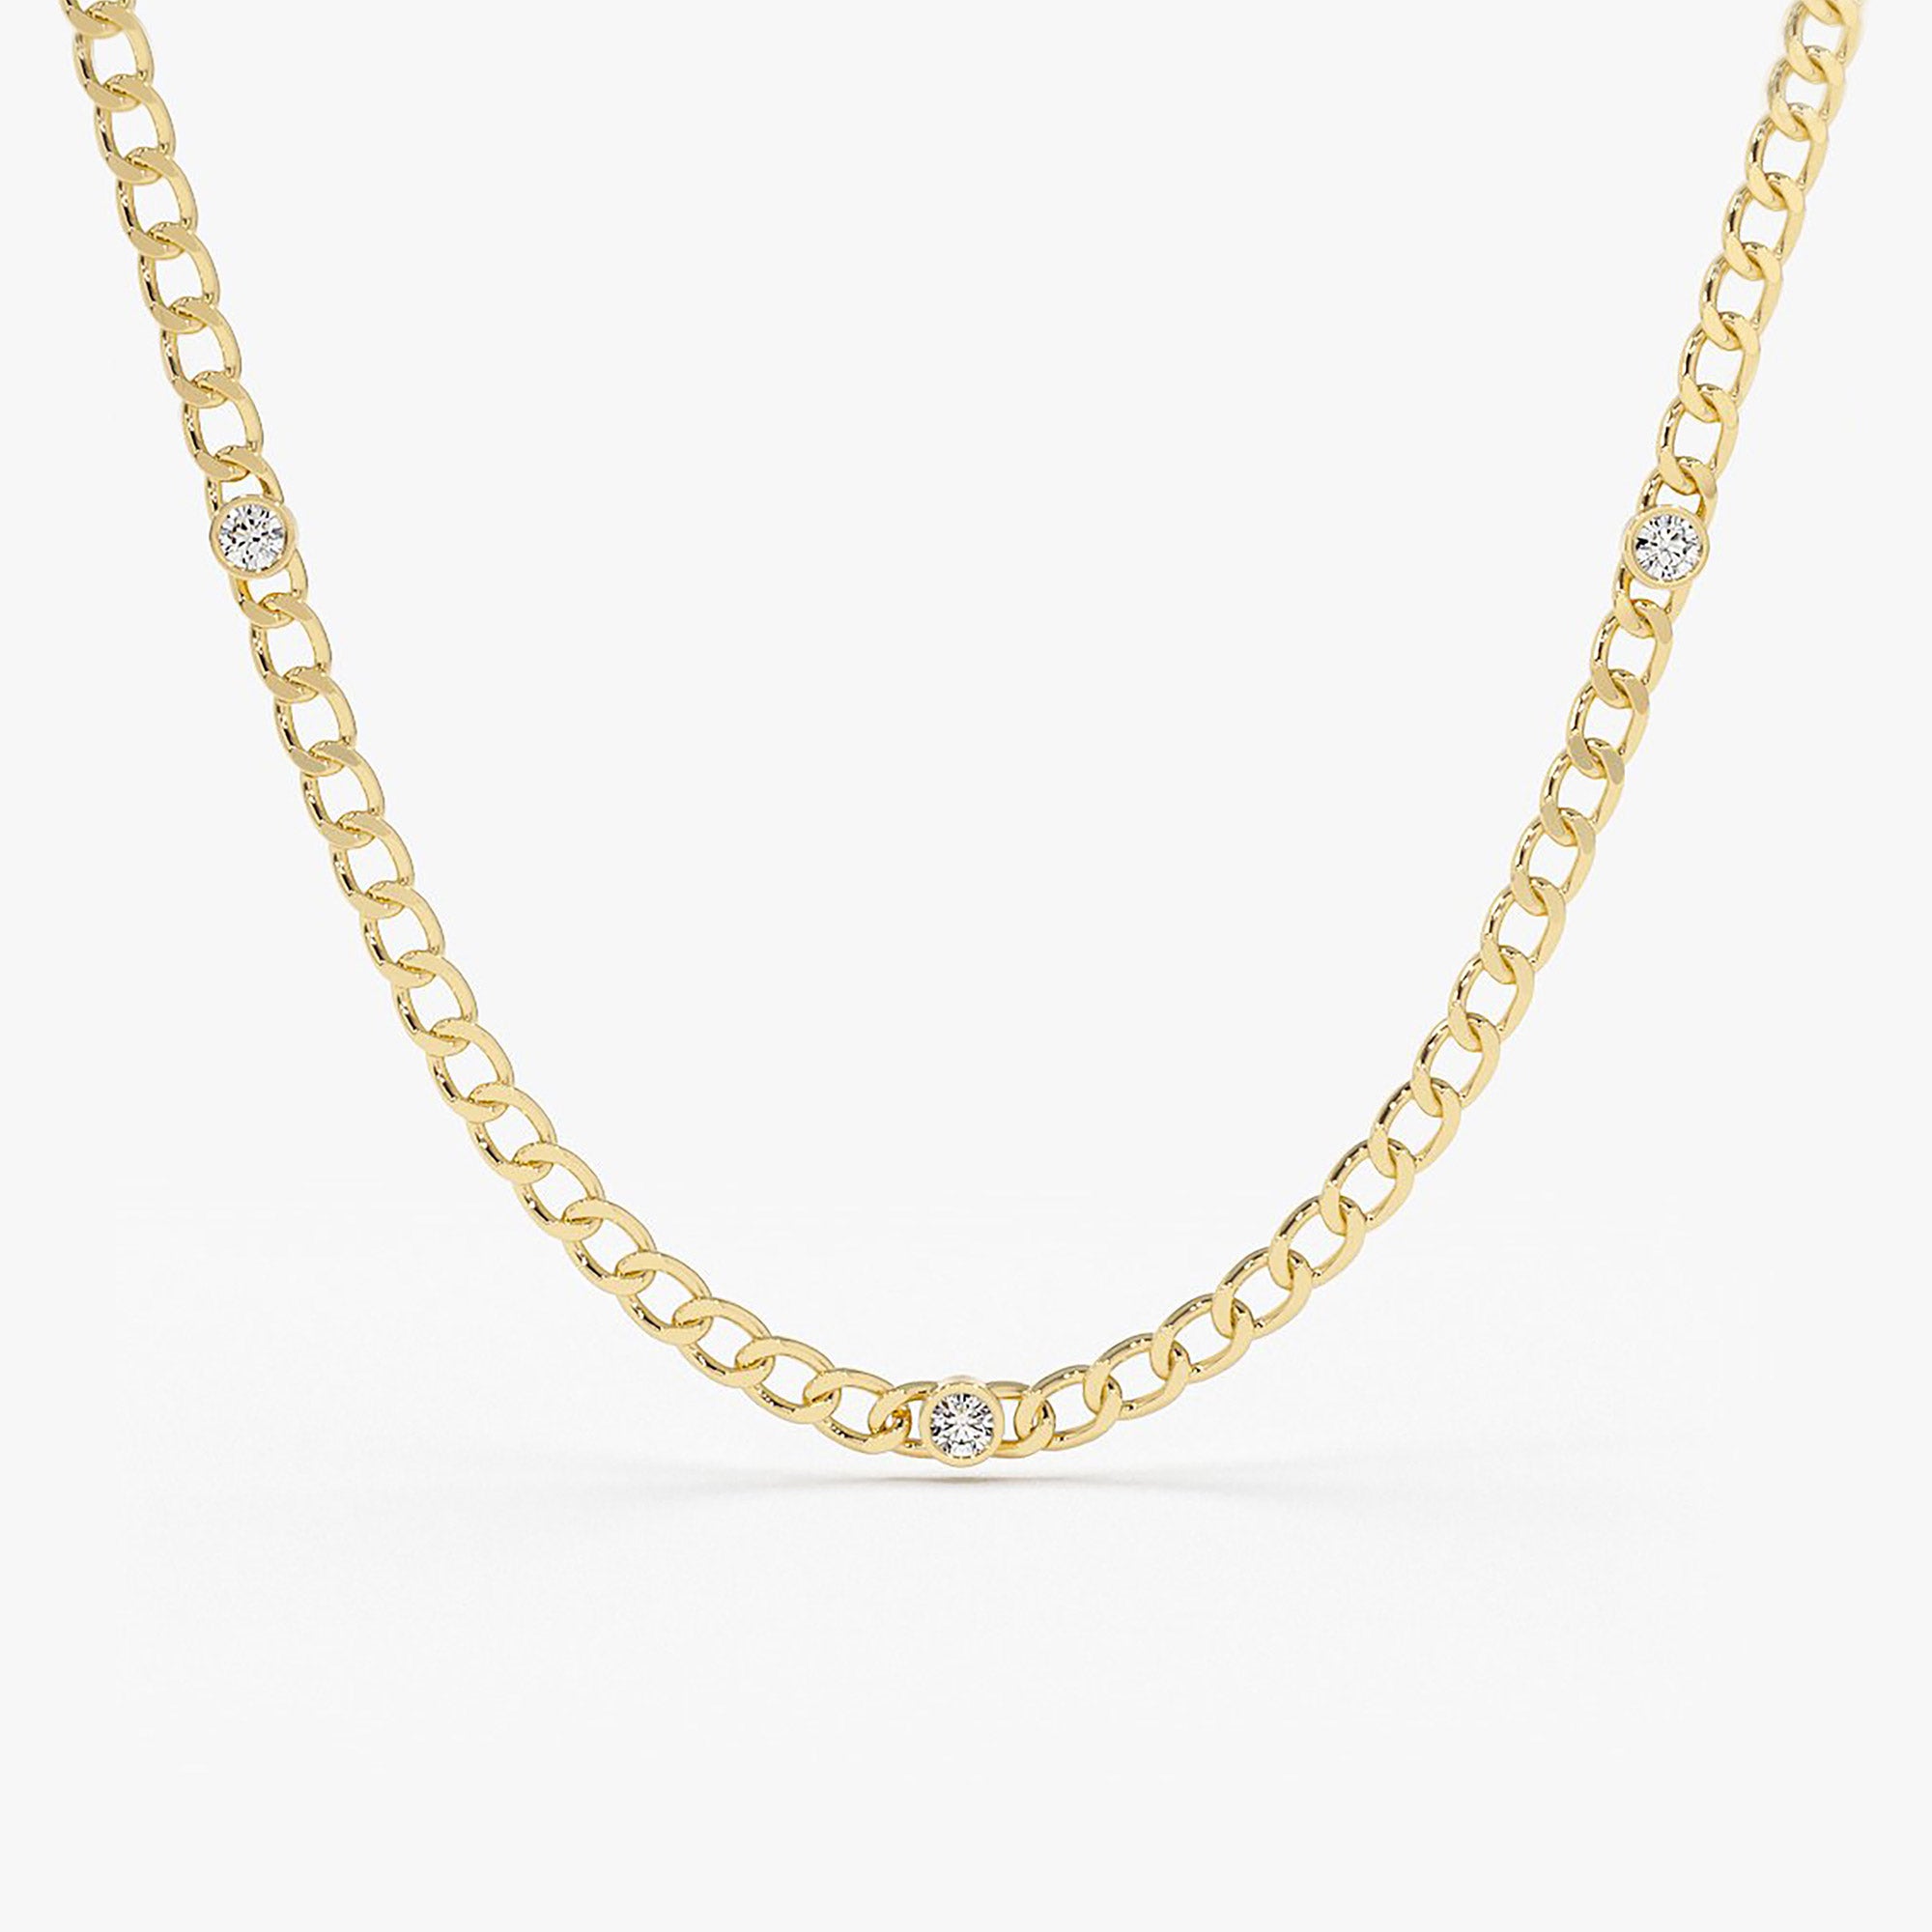 Diamond-Cut 1 mm Bead Chain 7Bracelet 16 18 20 24 Necklace 14K Yellow White Rose Gold 14K Rose Gold / 20 Necklace